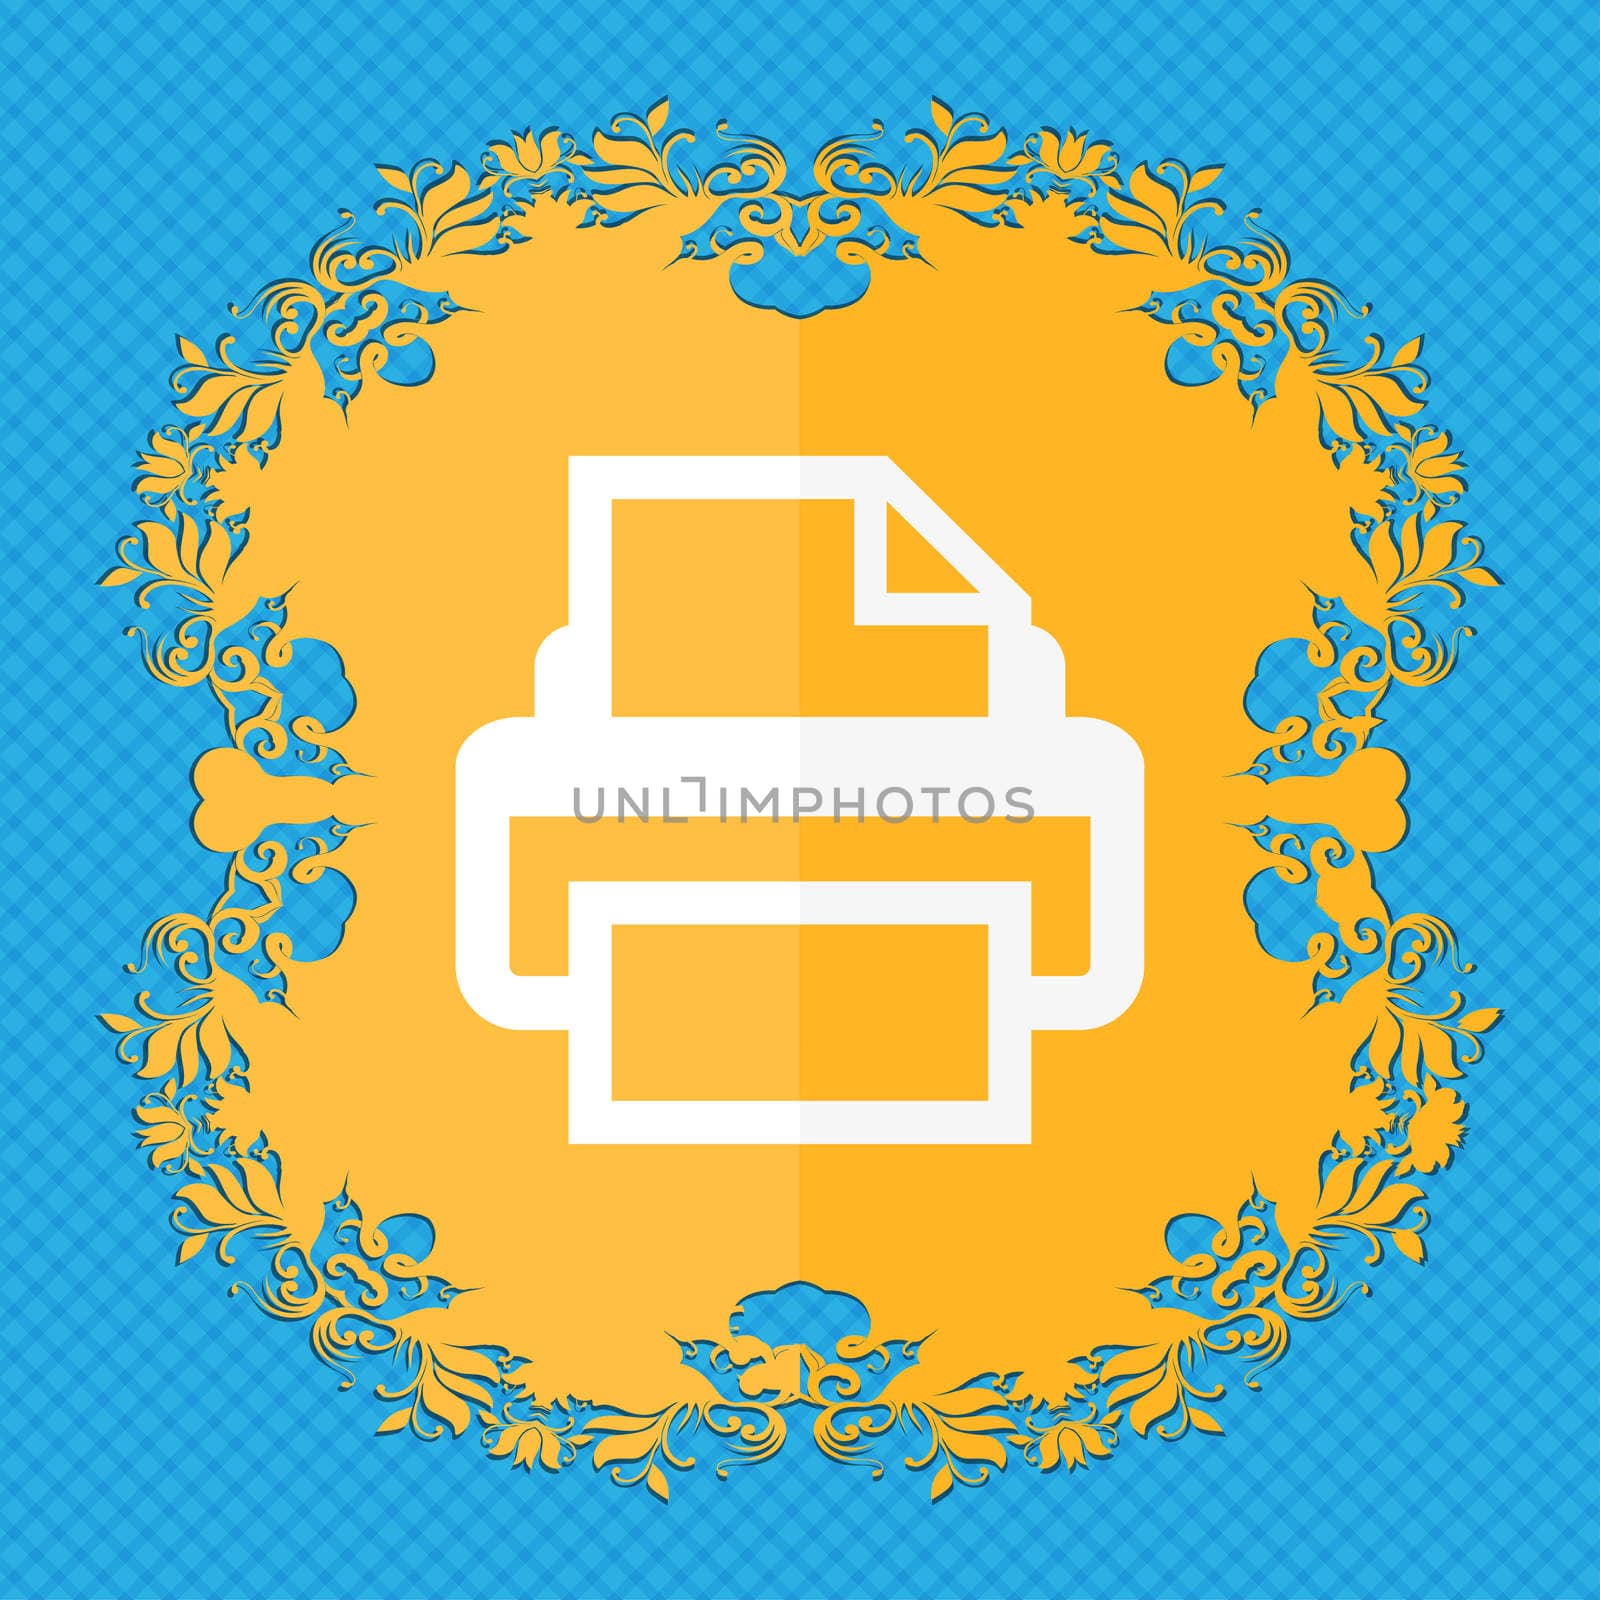 Print sign icon. Printing symbol. Floral flat design on a blue abstract background with place for your text. illustration